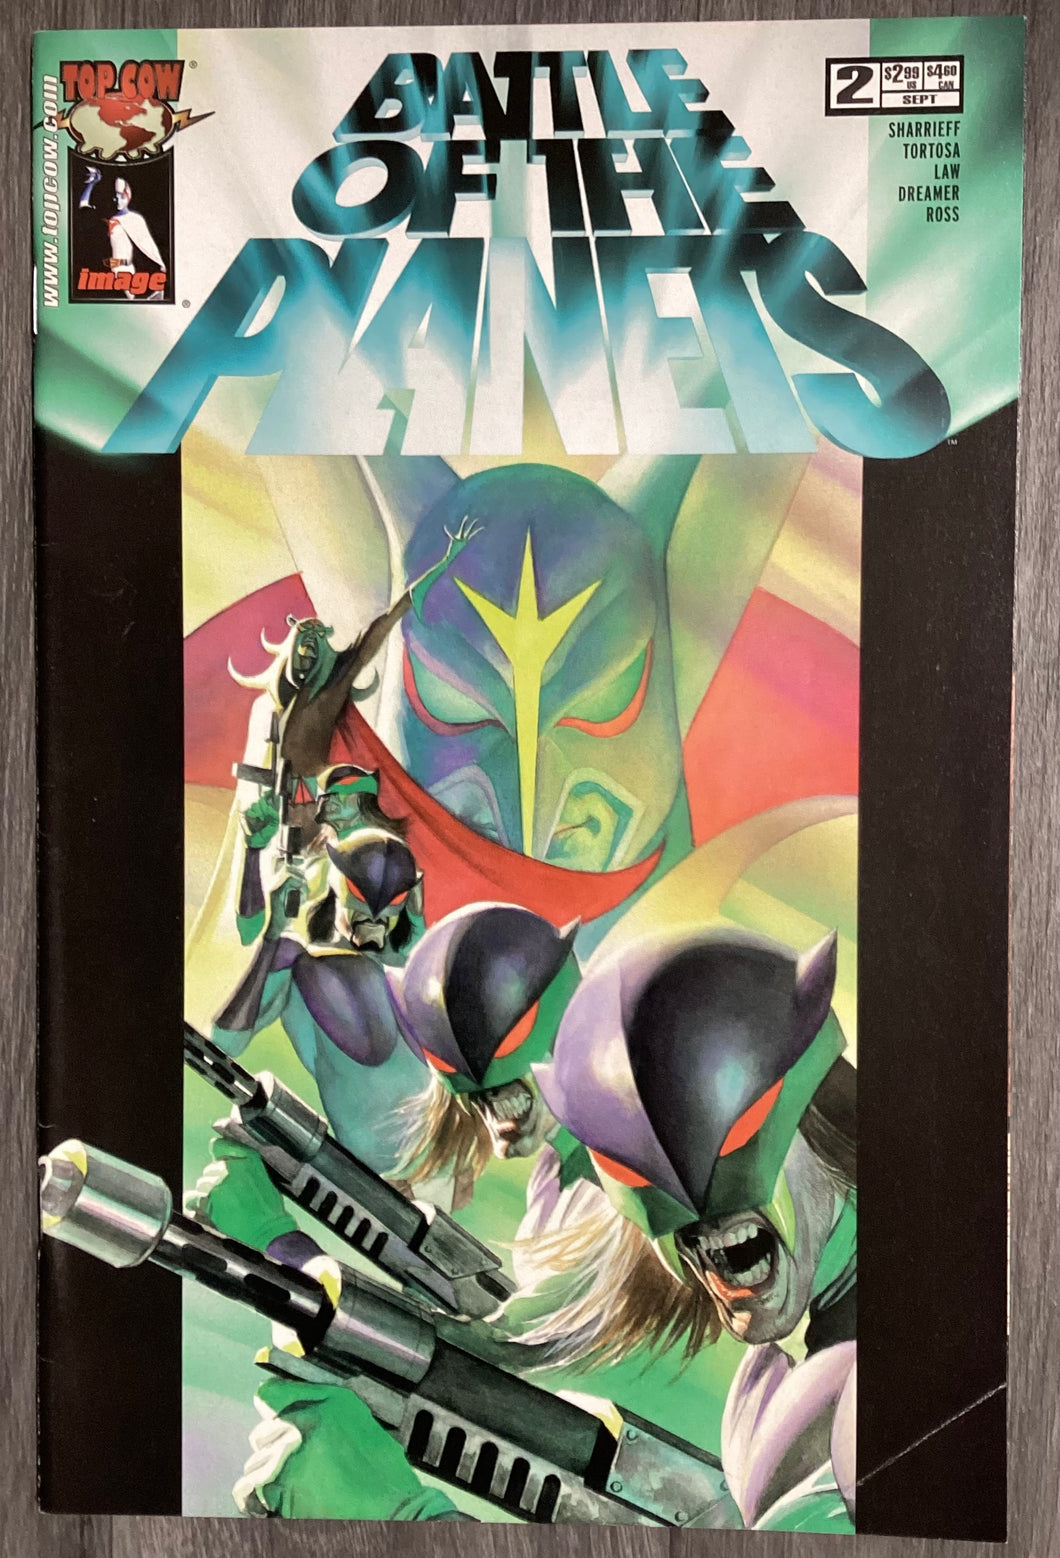 Battle of the Planets No. #2 2002 Top Cow/Image Comics